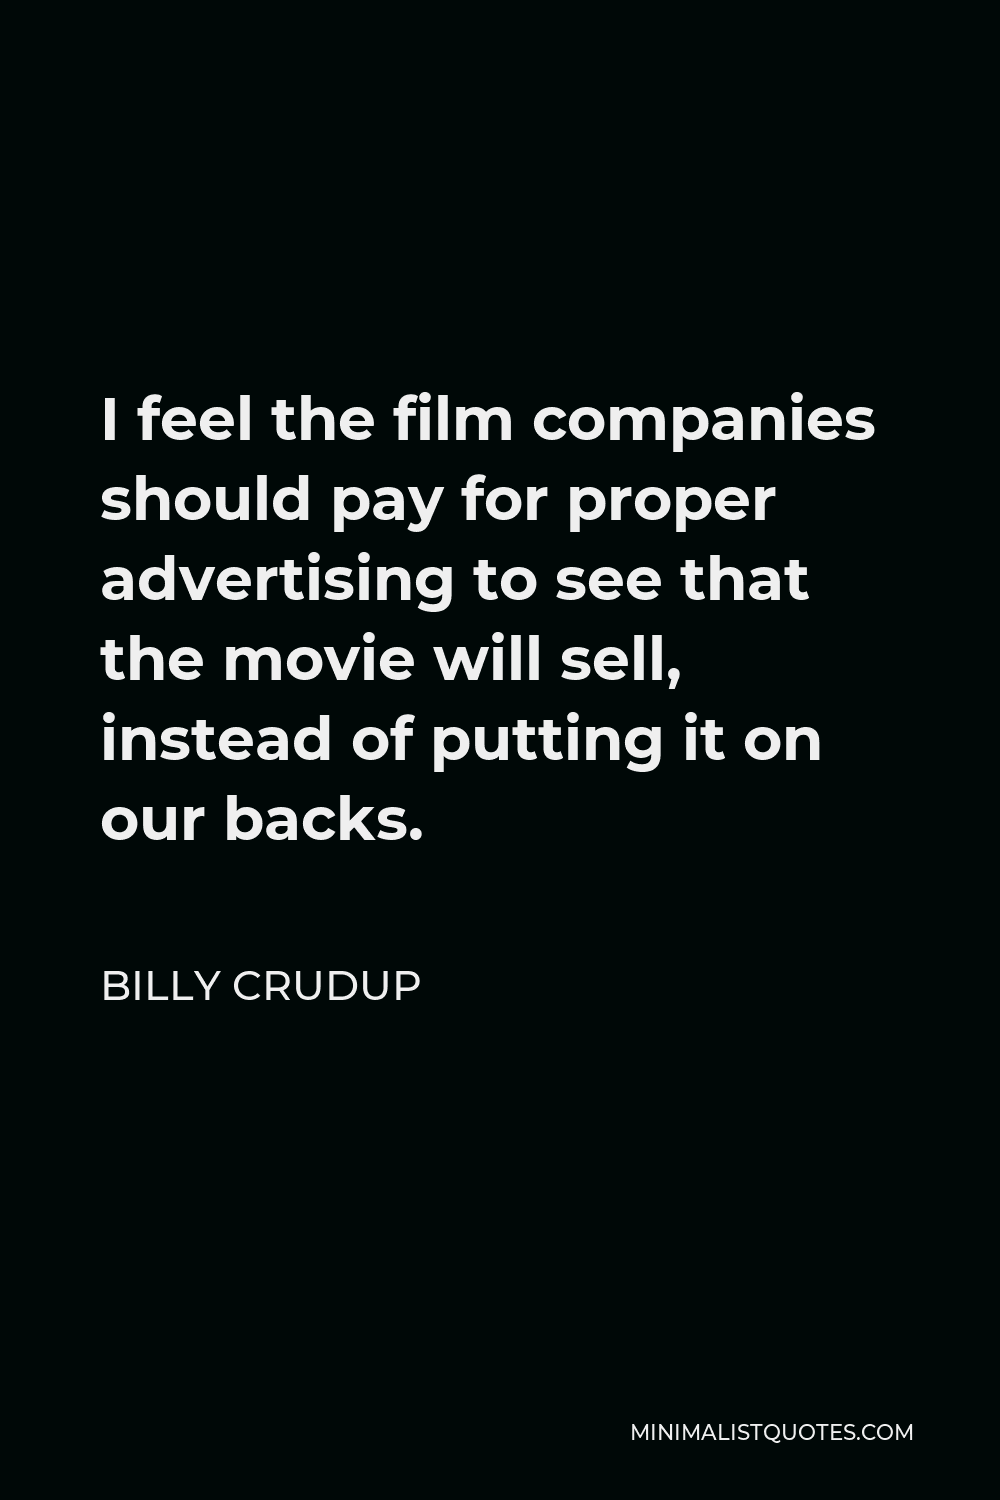 Billy Crudup Quote - I feel the film companies should pay for proper advertising to see that the movie will sell, instead of putting it on our backs.